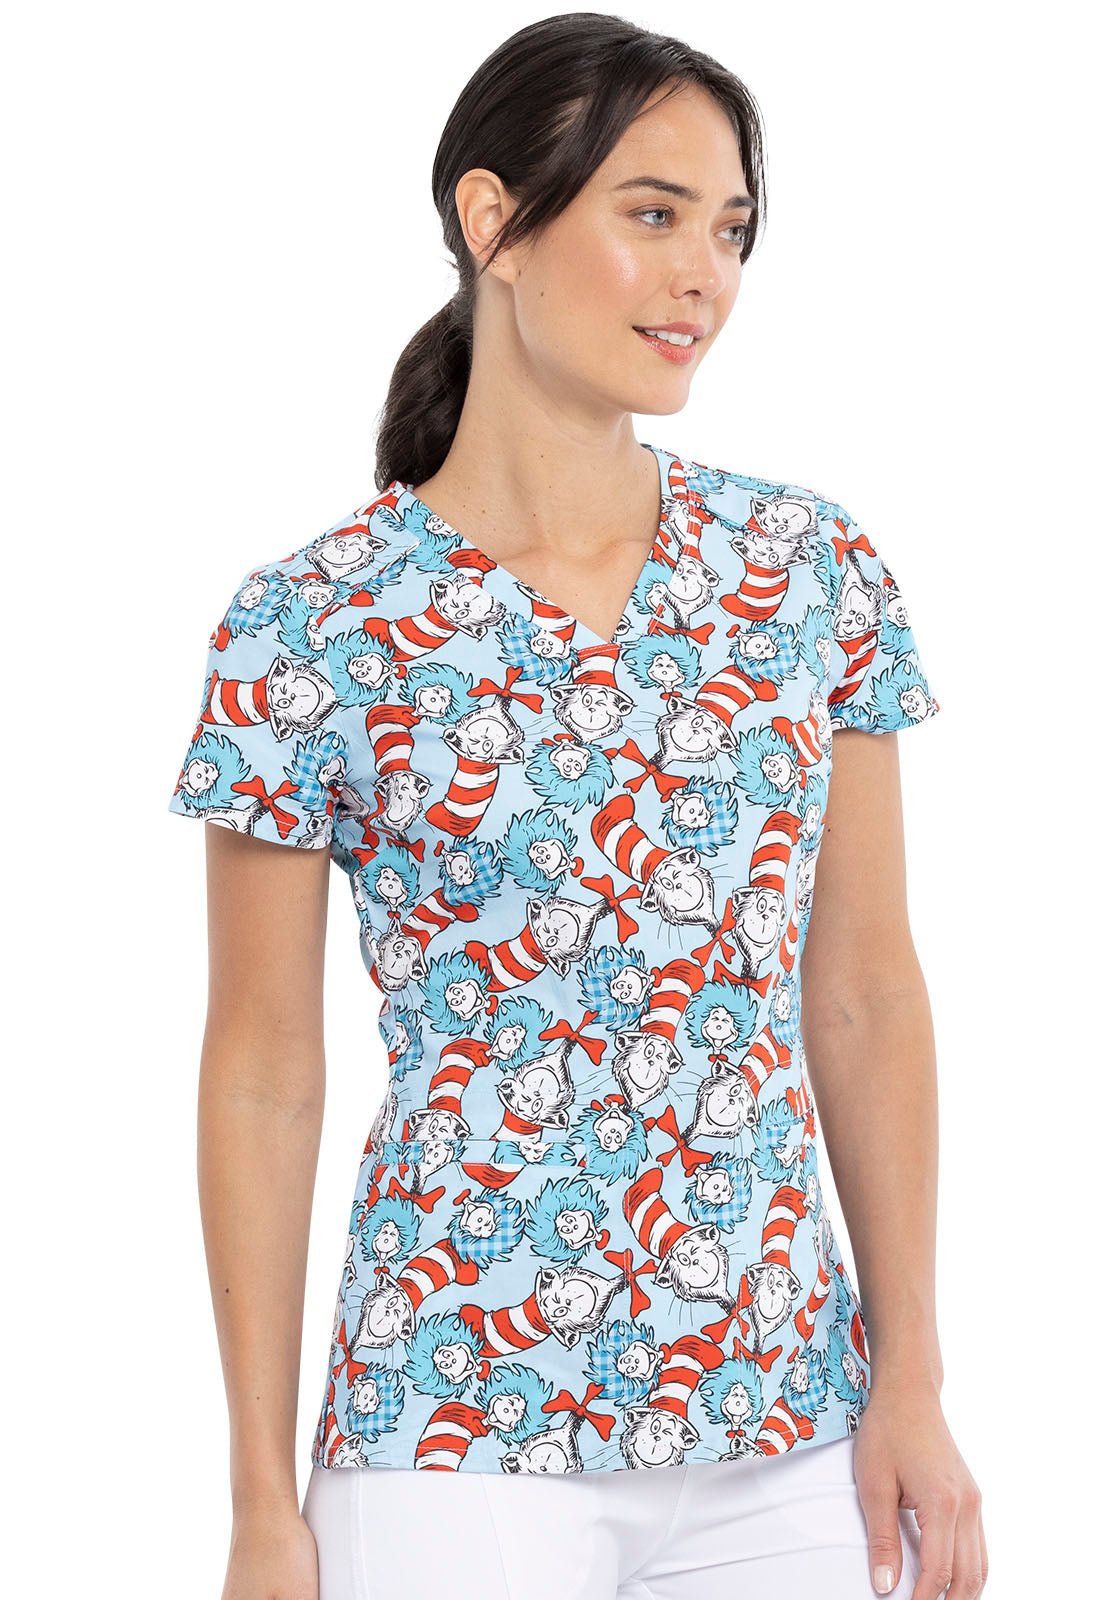 Cat In The Hat Tooniforms Licensed Dr. Seuss V Neck Scrub Top TF666 SEHG - Scrubs Select